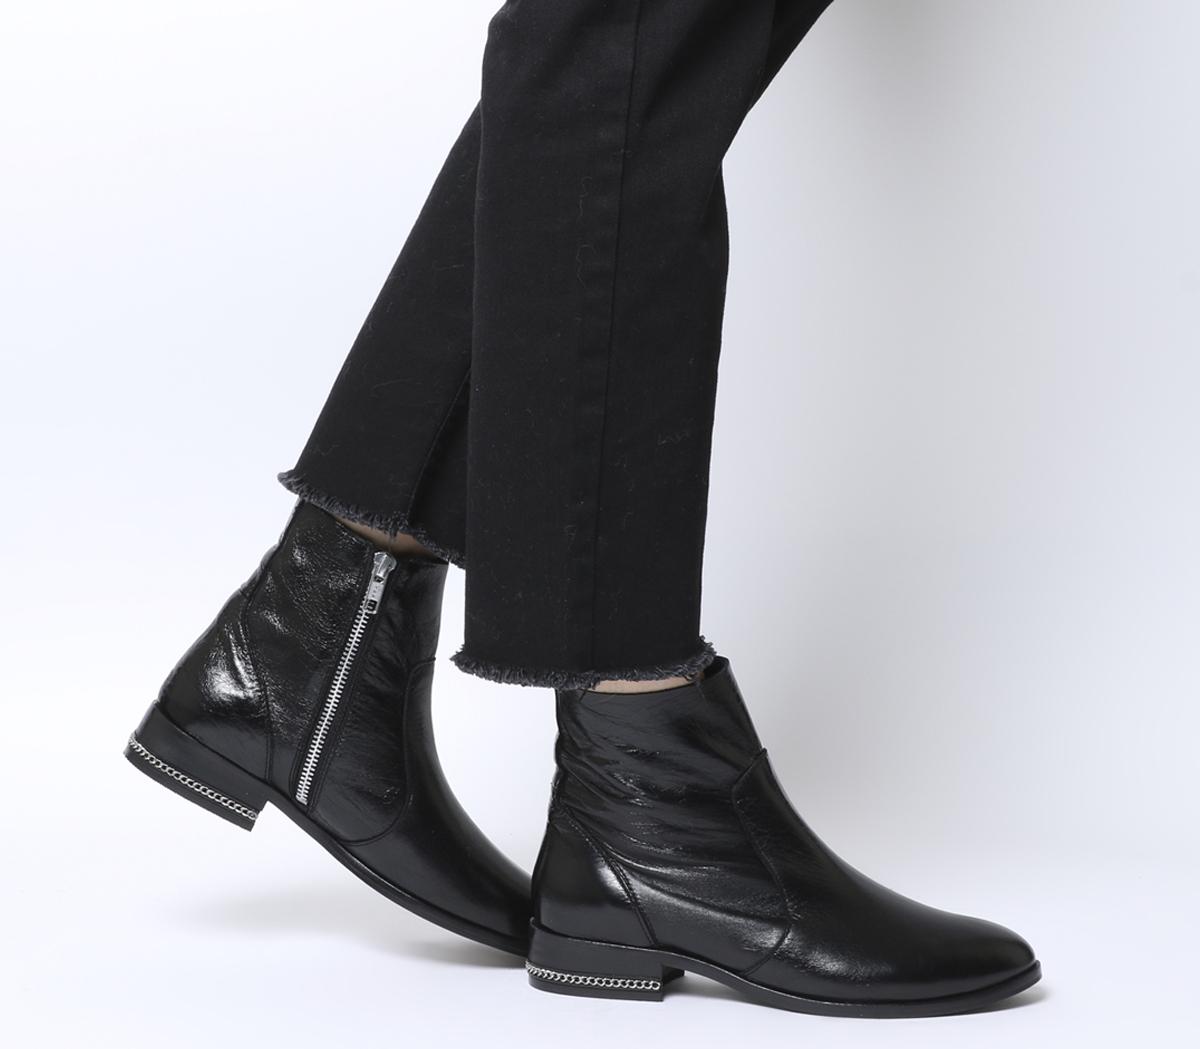 Office Ashleigh Flat Ankle Boots Black 